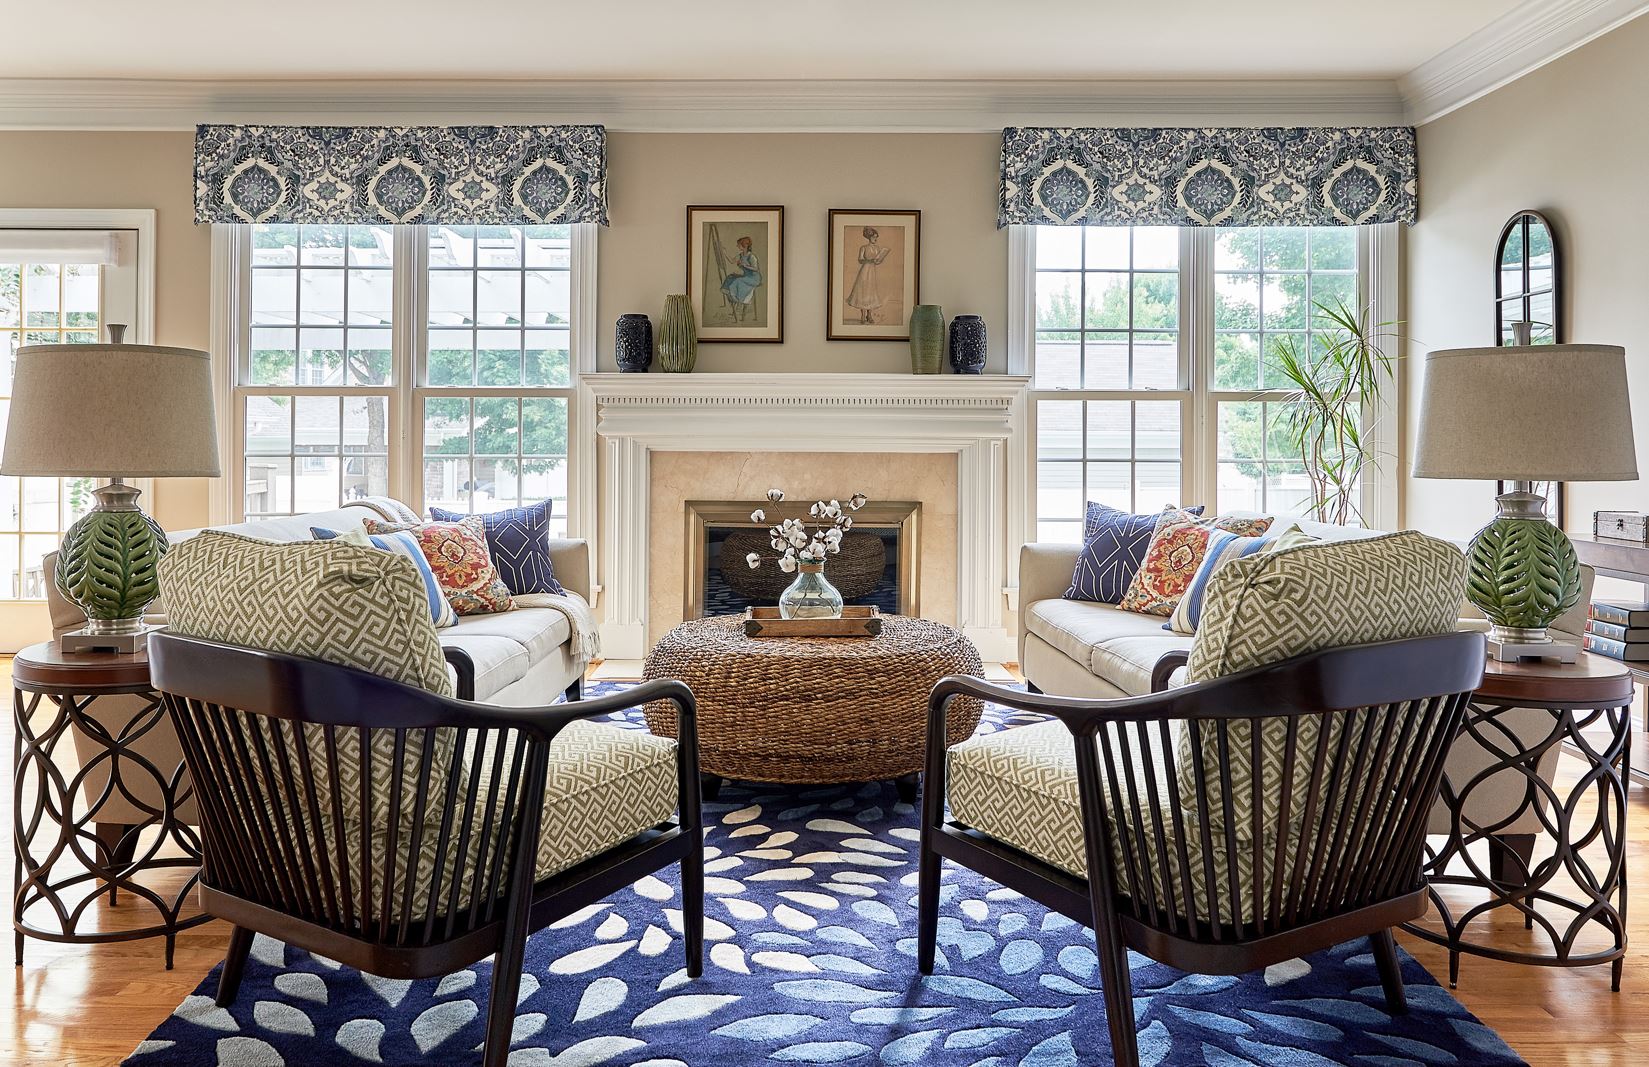 Family room with central rattan coffee table and blue rug